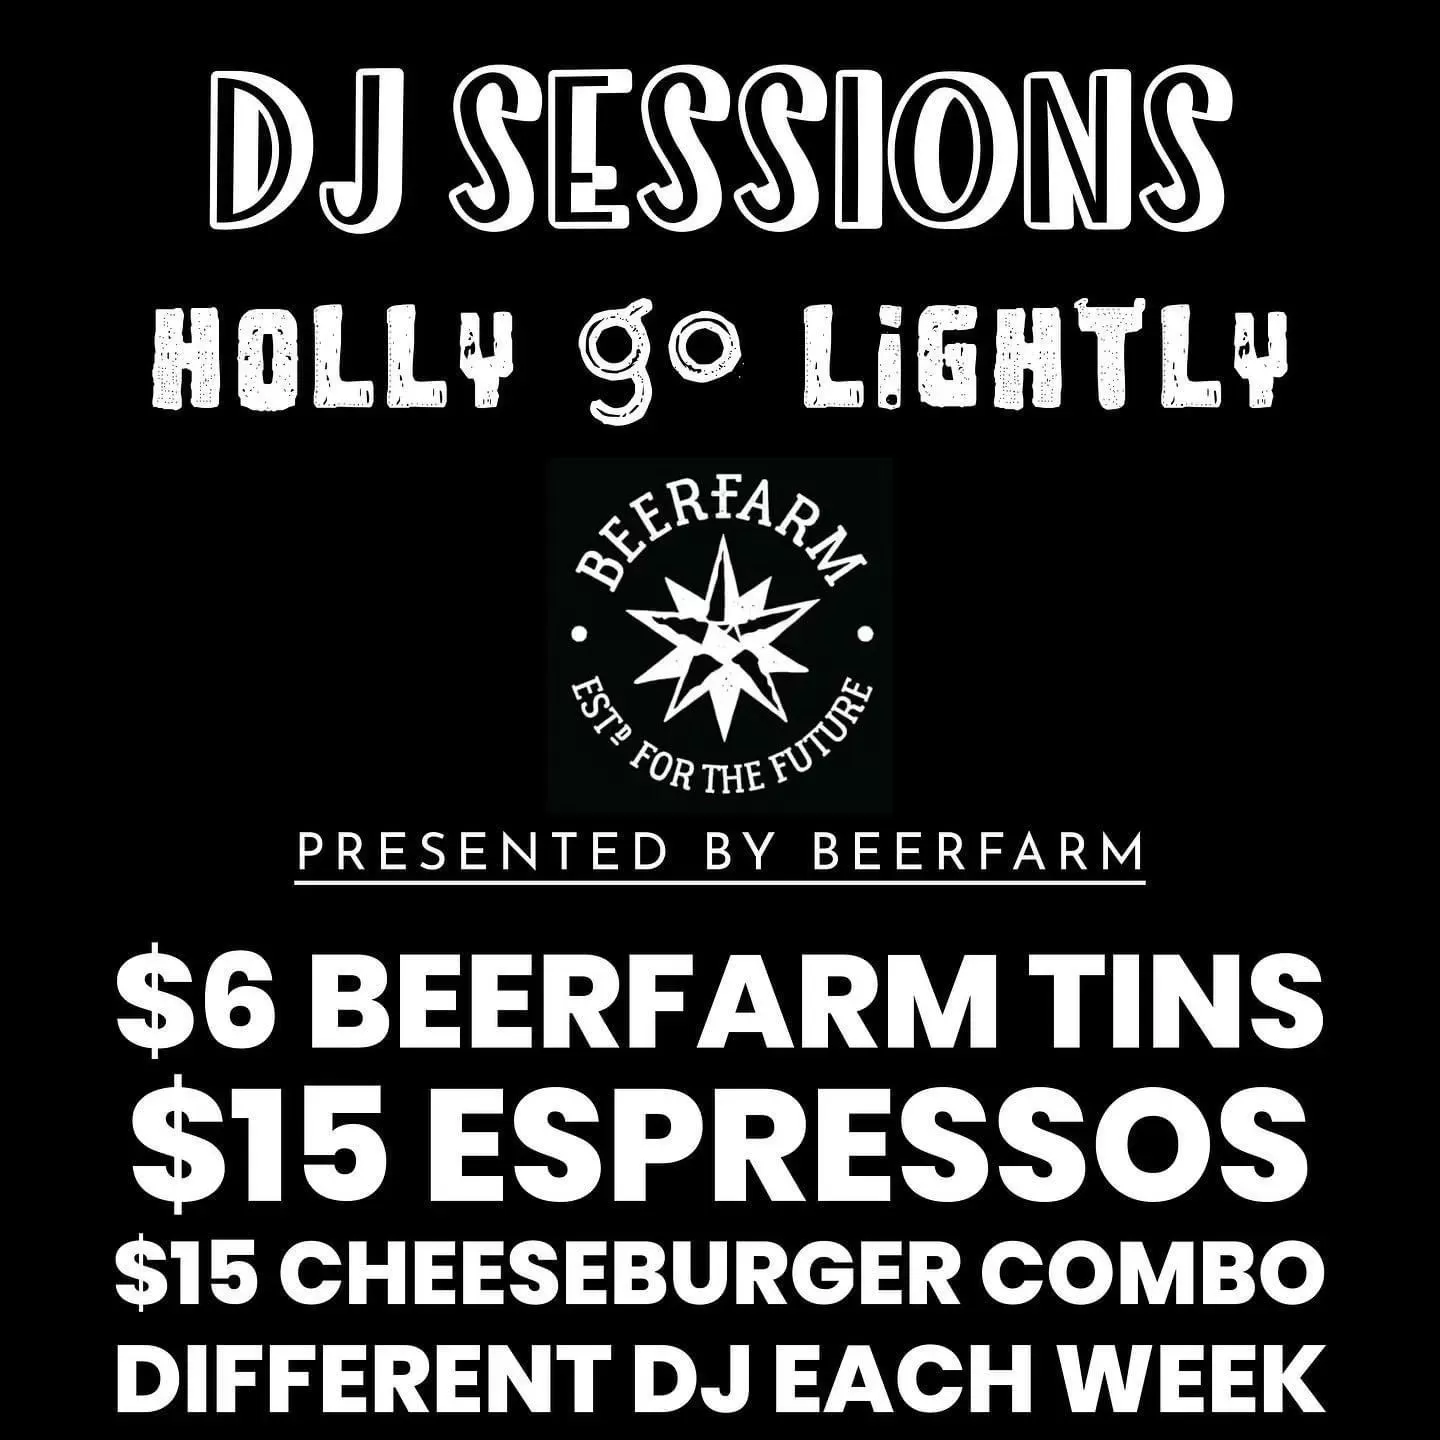 Thursday Night DJ Sessions at Holly Go Lightly image